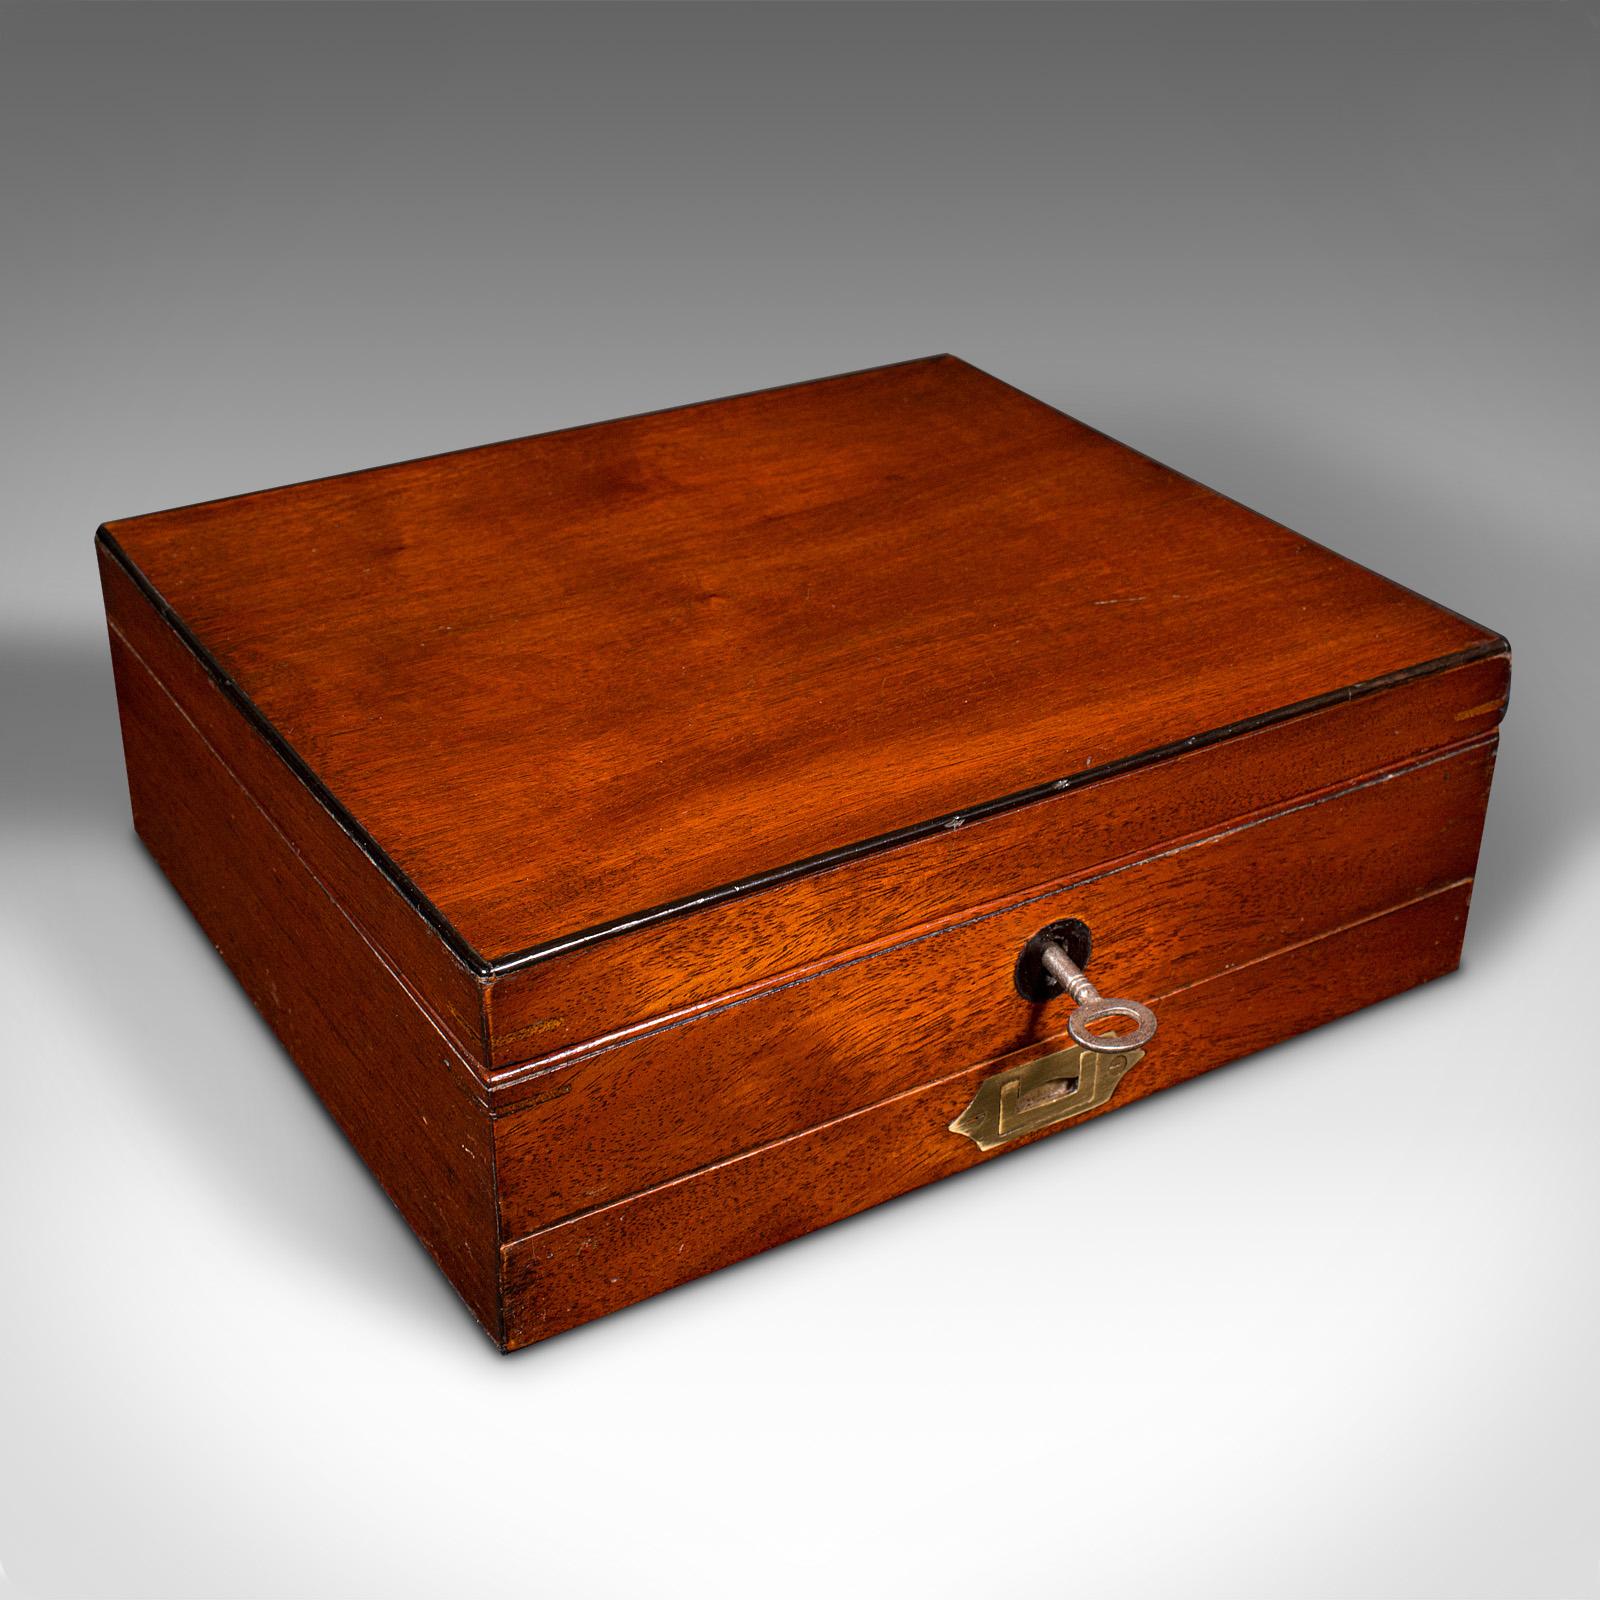 This is an antique artist's paint box. An English, mahogany and ebony carry case by Winsor & Newton of London, dating to the late Victorian period, circa 1890.

Superb artist's box from a renowned London paint specialist
Displays a desirable aged